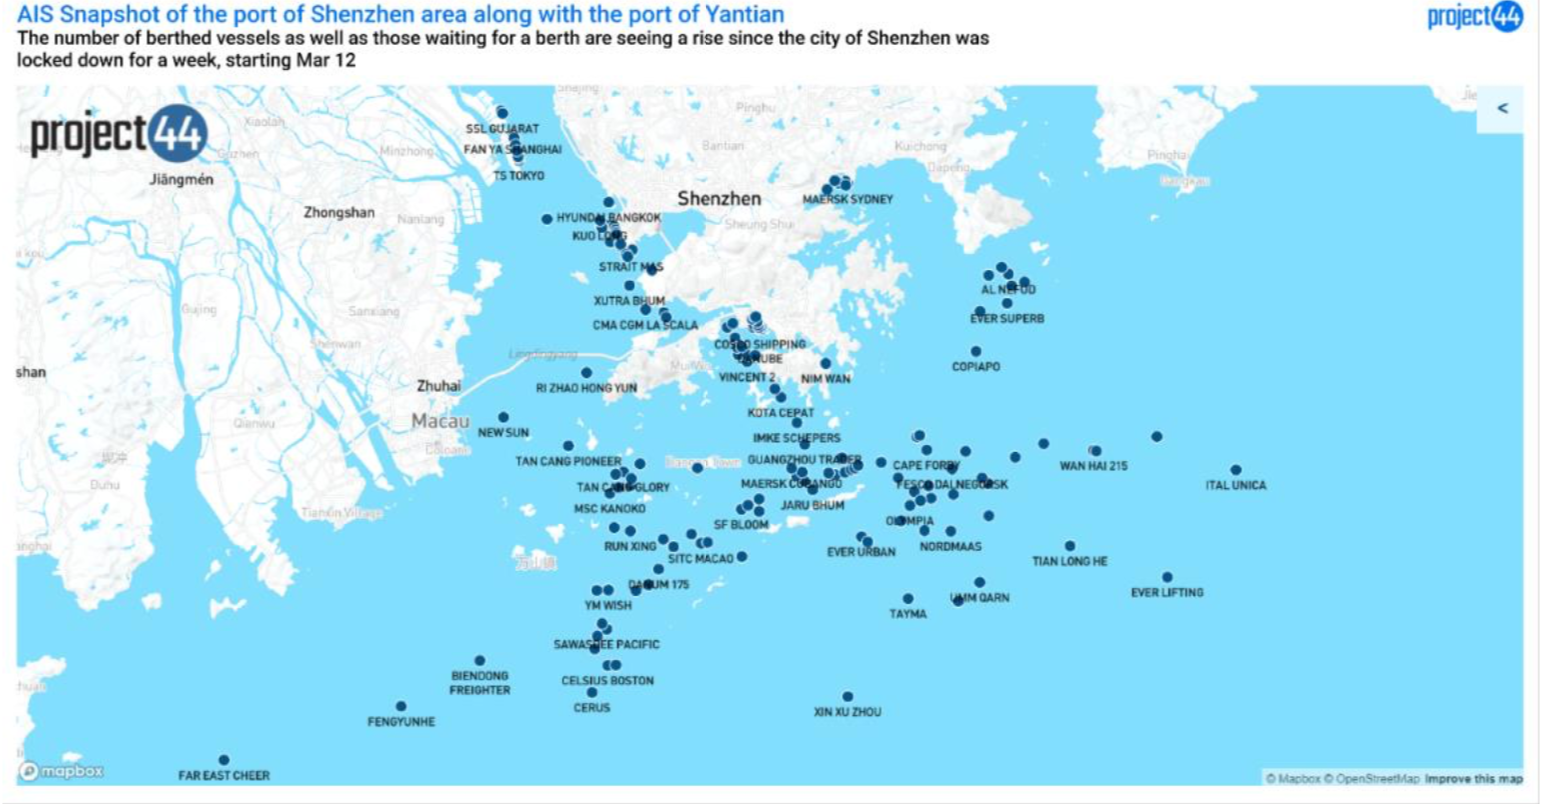 Chart: :AIS Snapshot of the port of Shenzhen area along with the port of Yantian. Source: project44